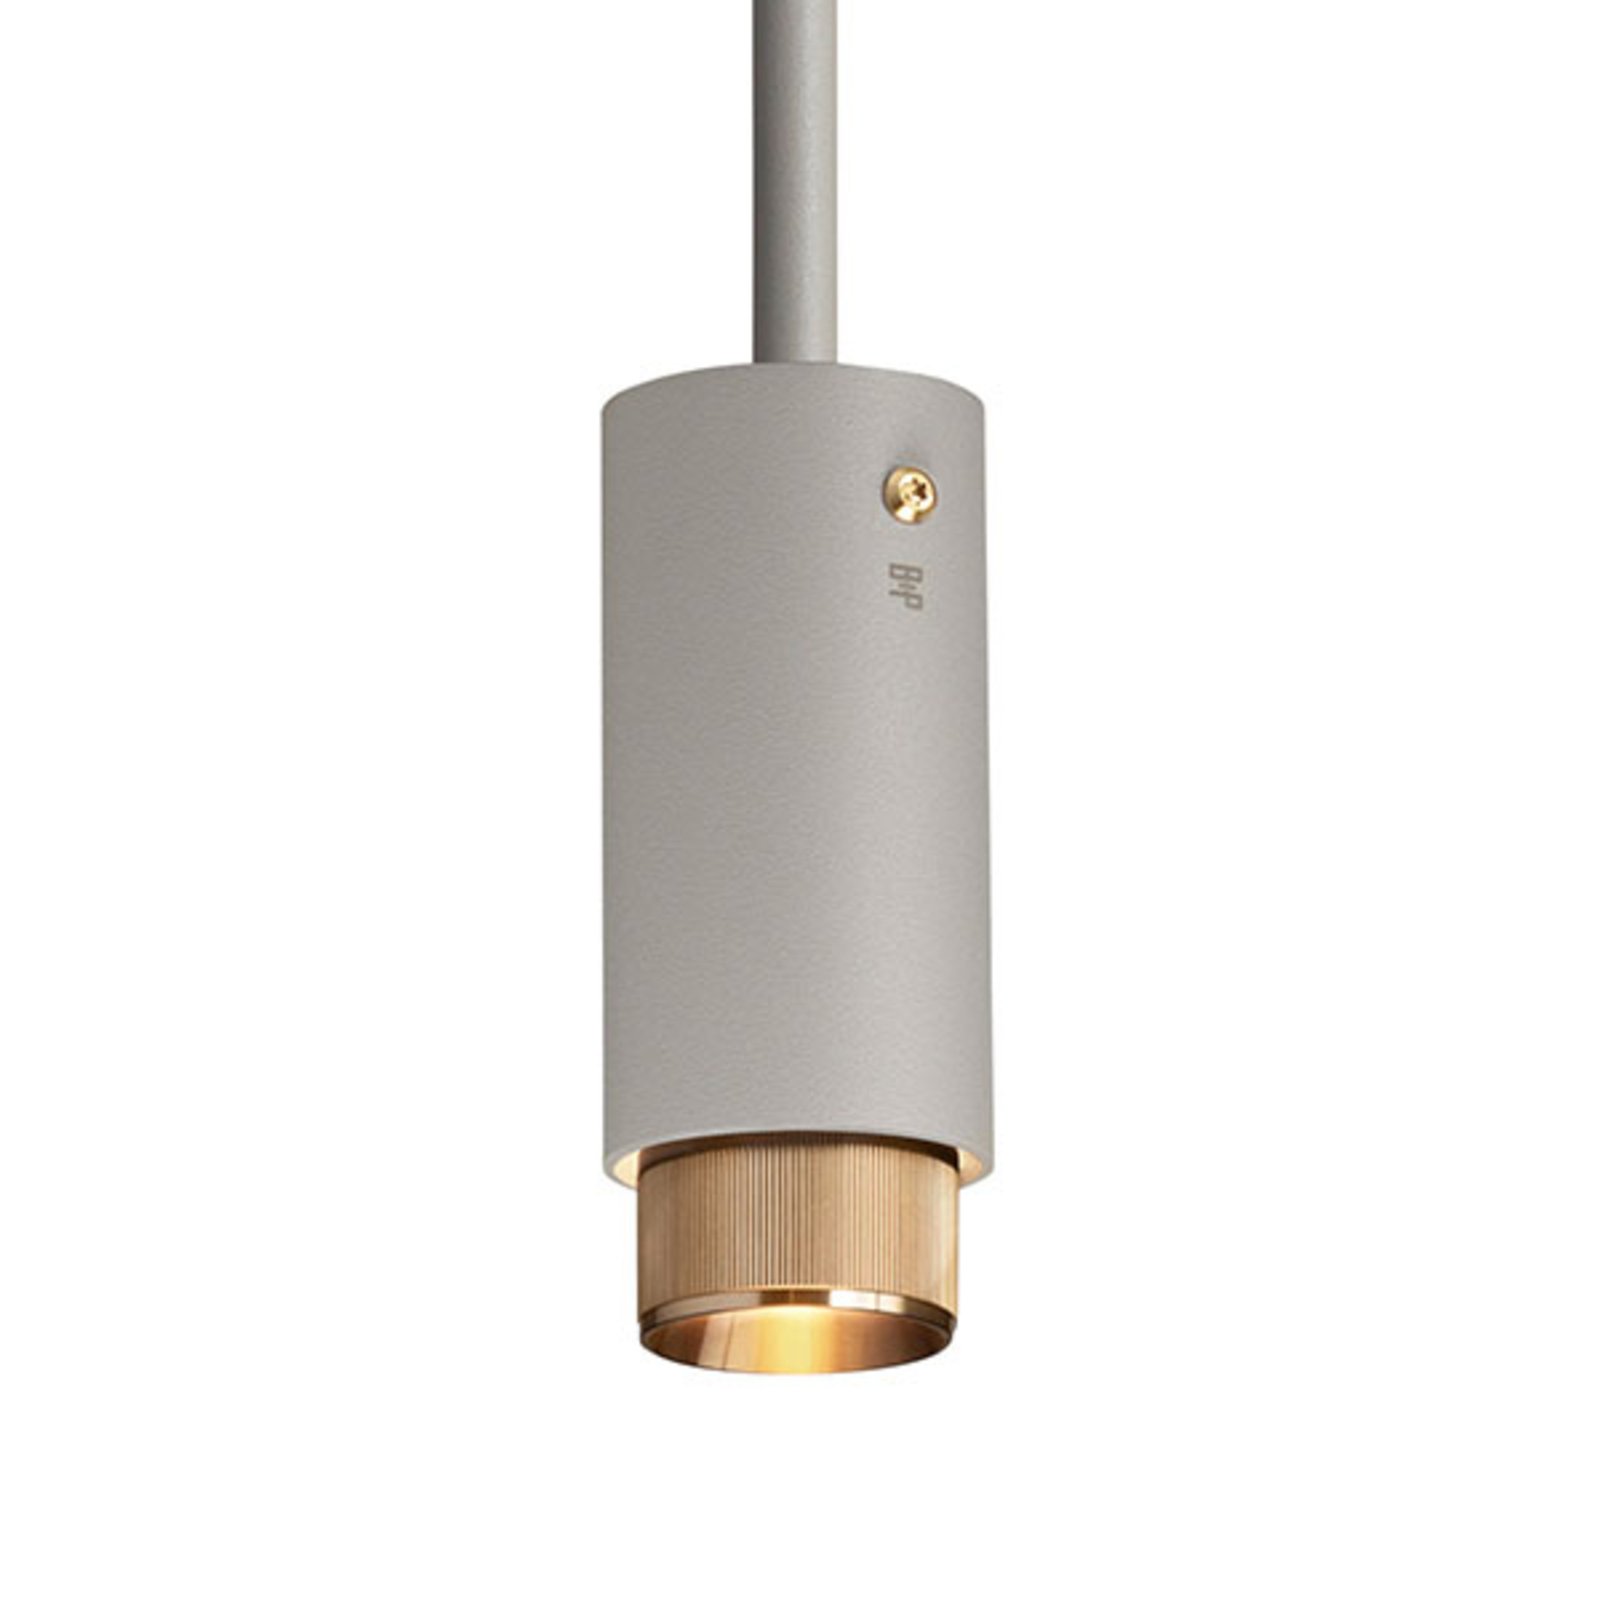 Buster + Punch Exhaust hanging light grey/brass